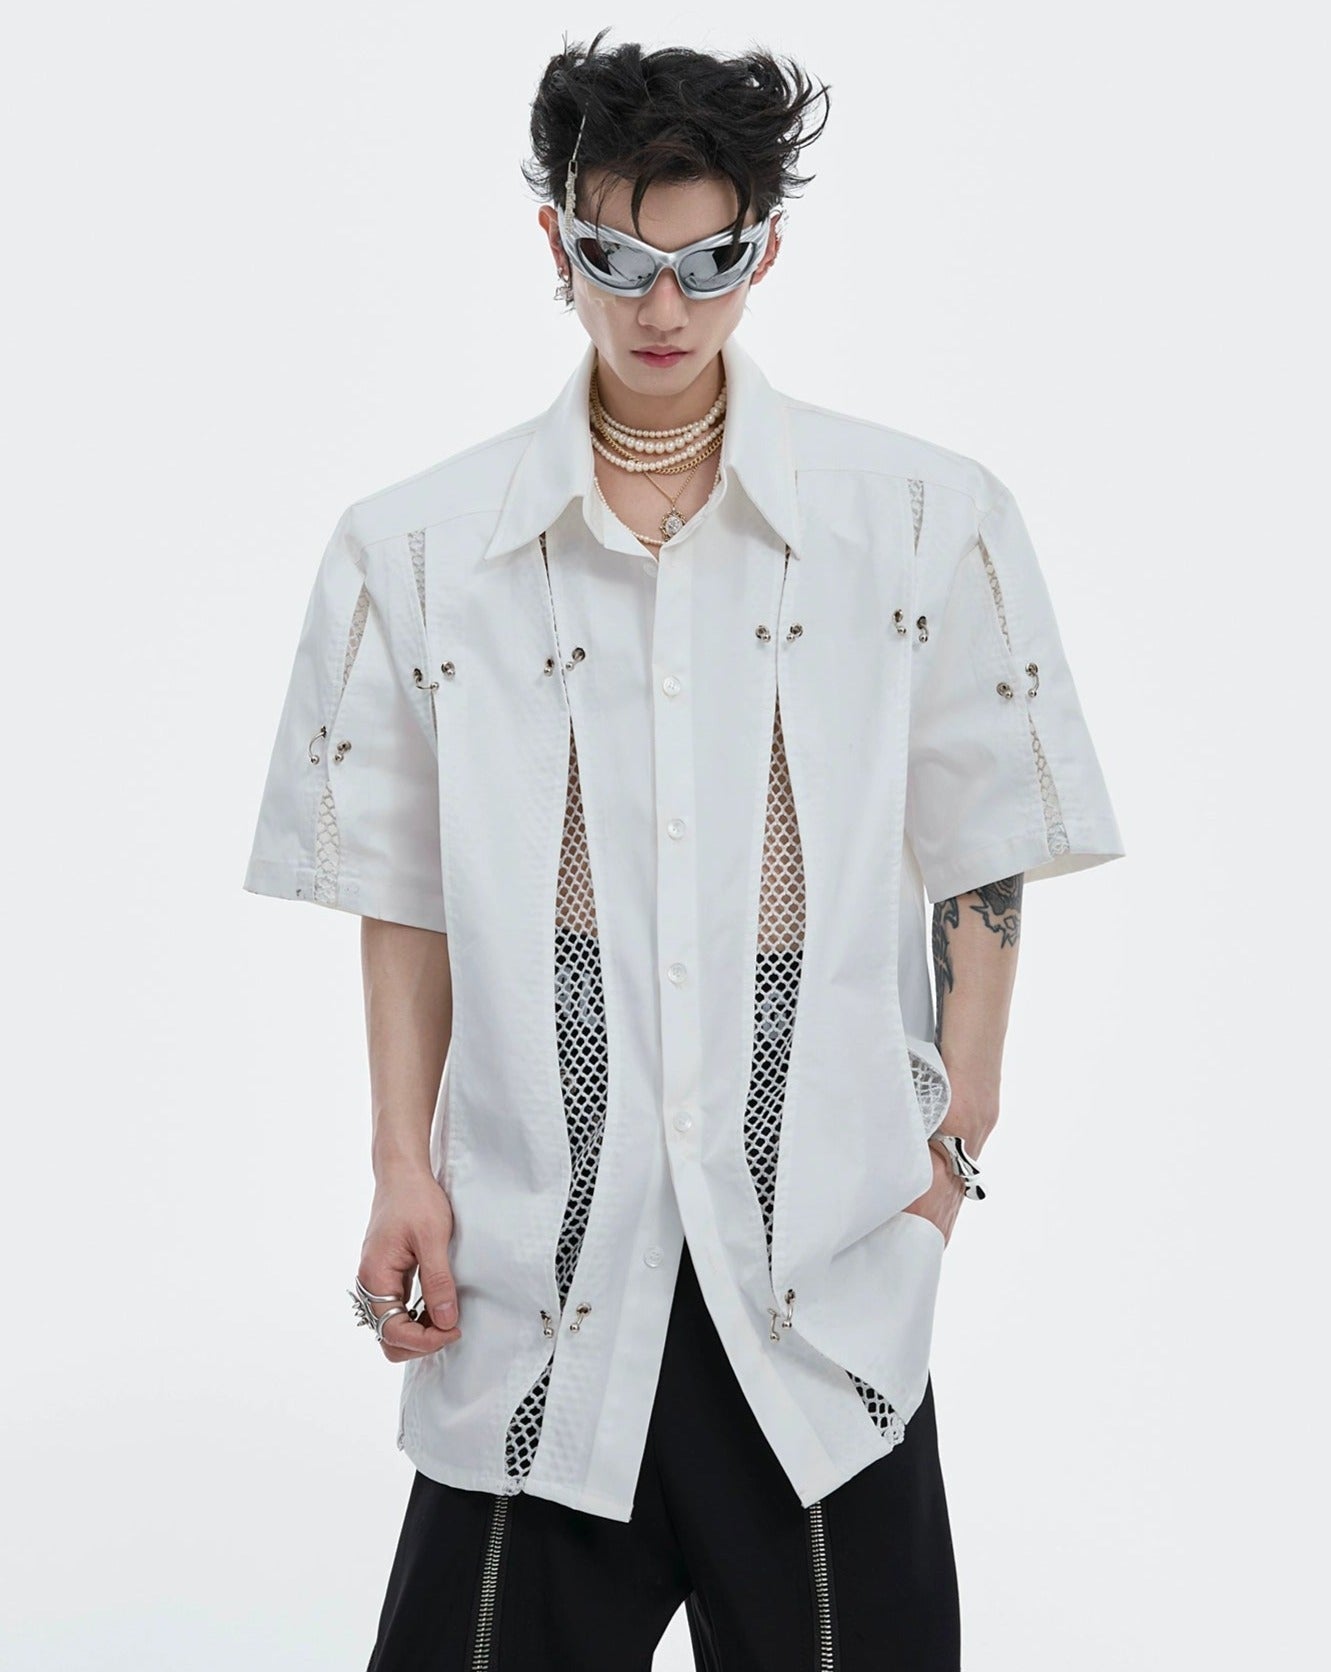 Washed Metal Accent T-Shirt Korean Street Fashion Shirt By Argue Culture Shop Online at OH Vault